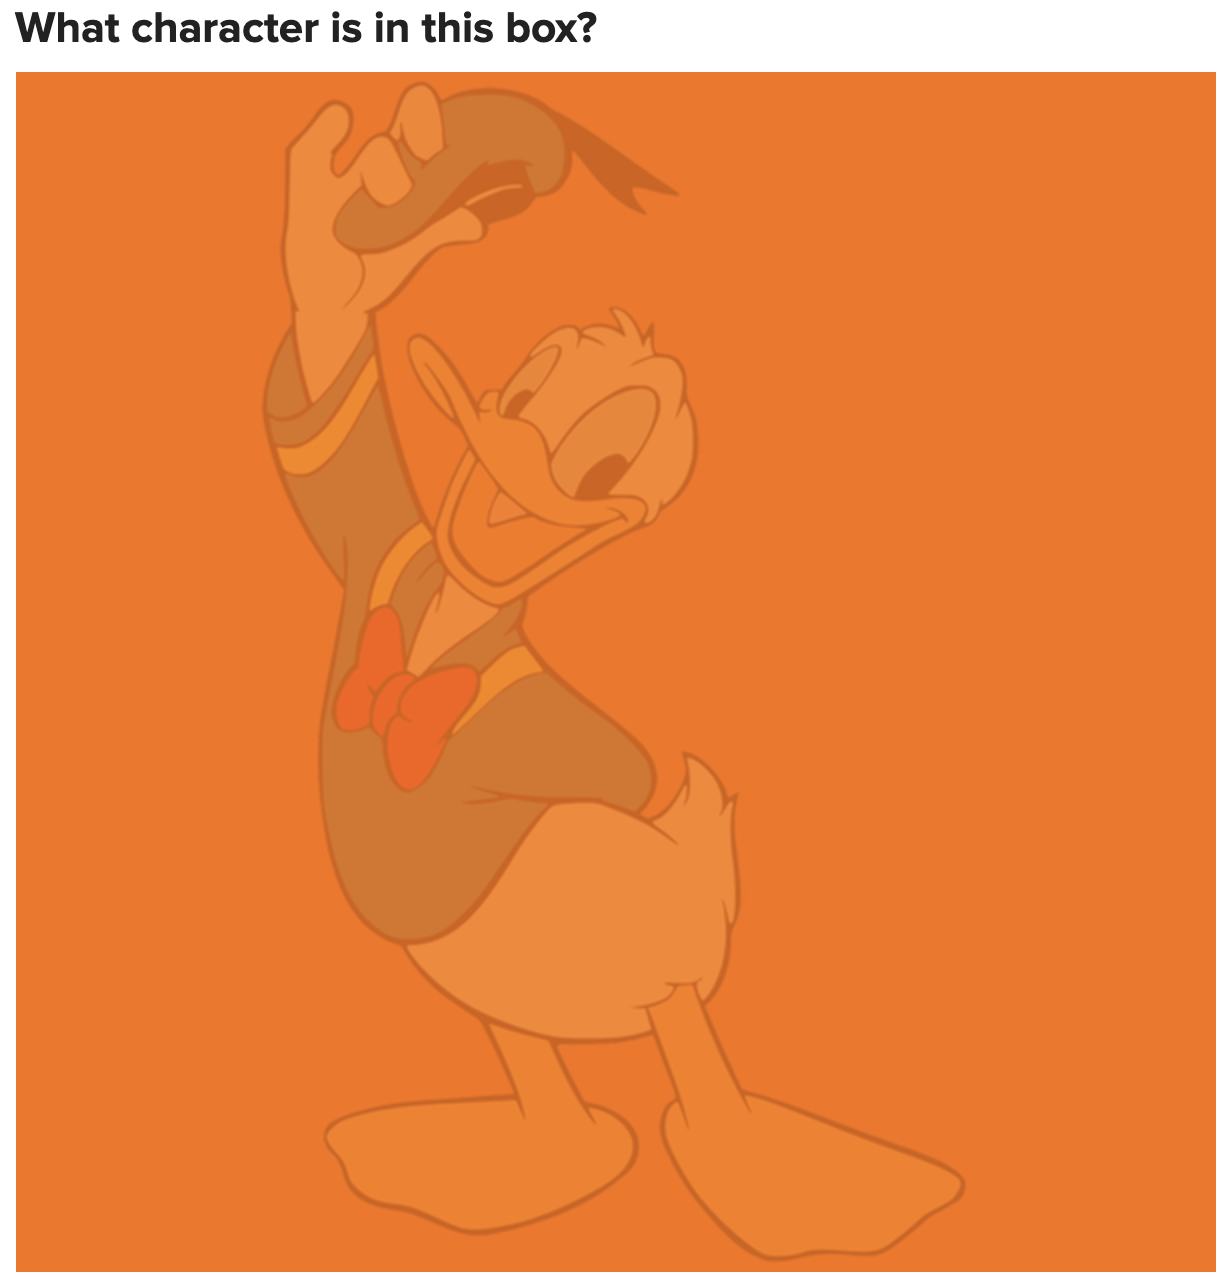 An image of Donald Duck overlaid on a solid orange block 